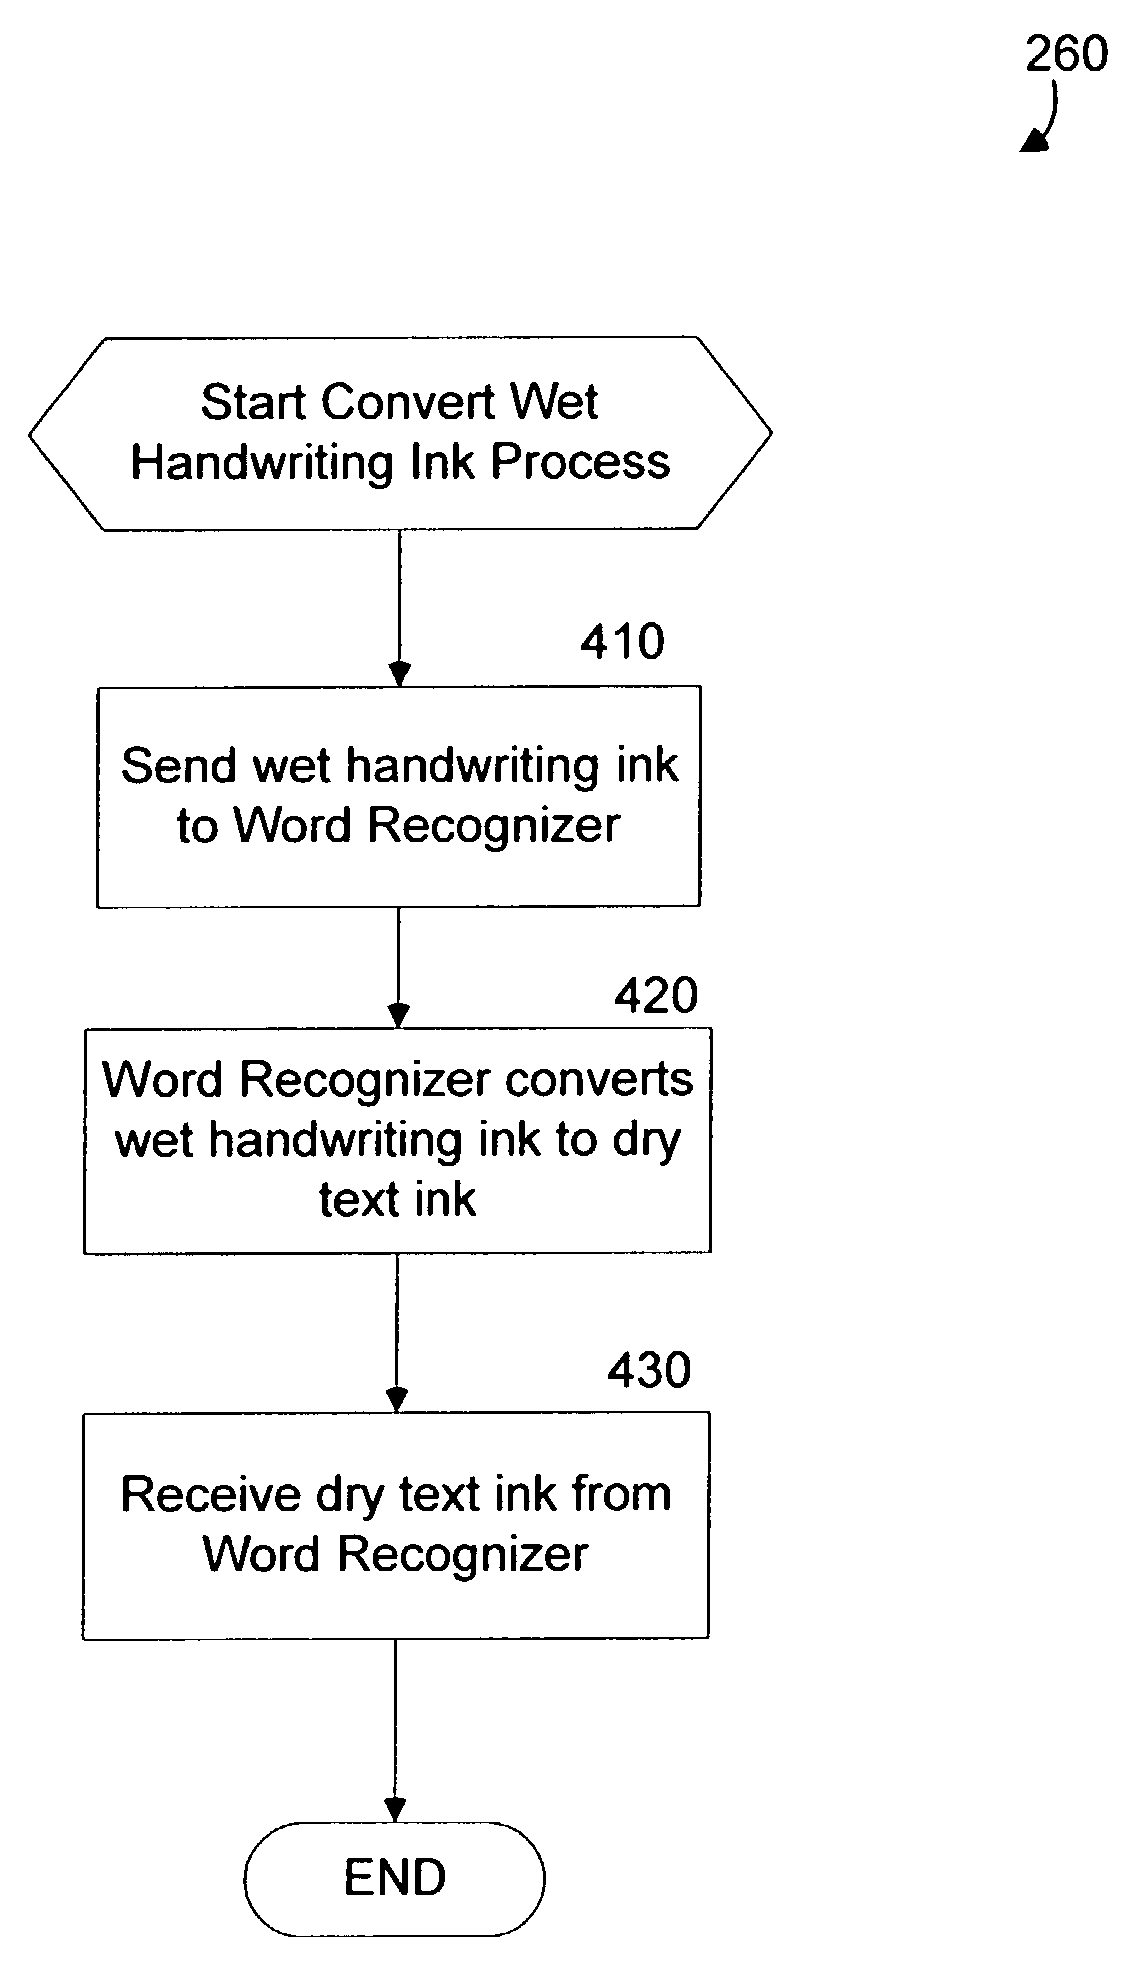 System and method for automatically recognizing electronic handwriting in an electronic document and converting to text